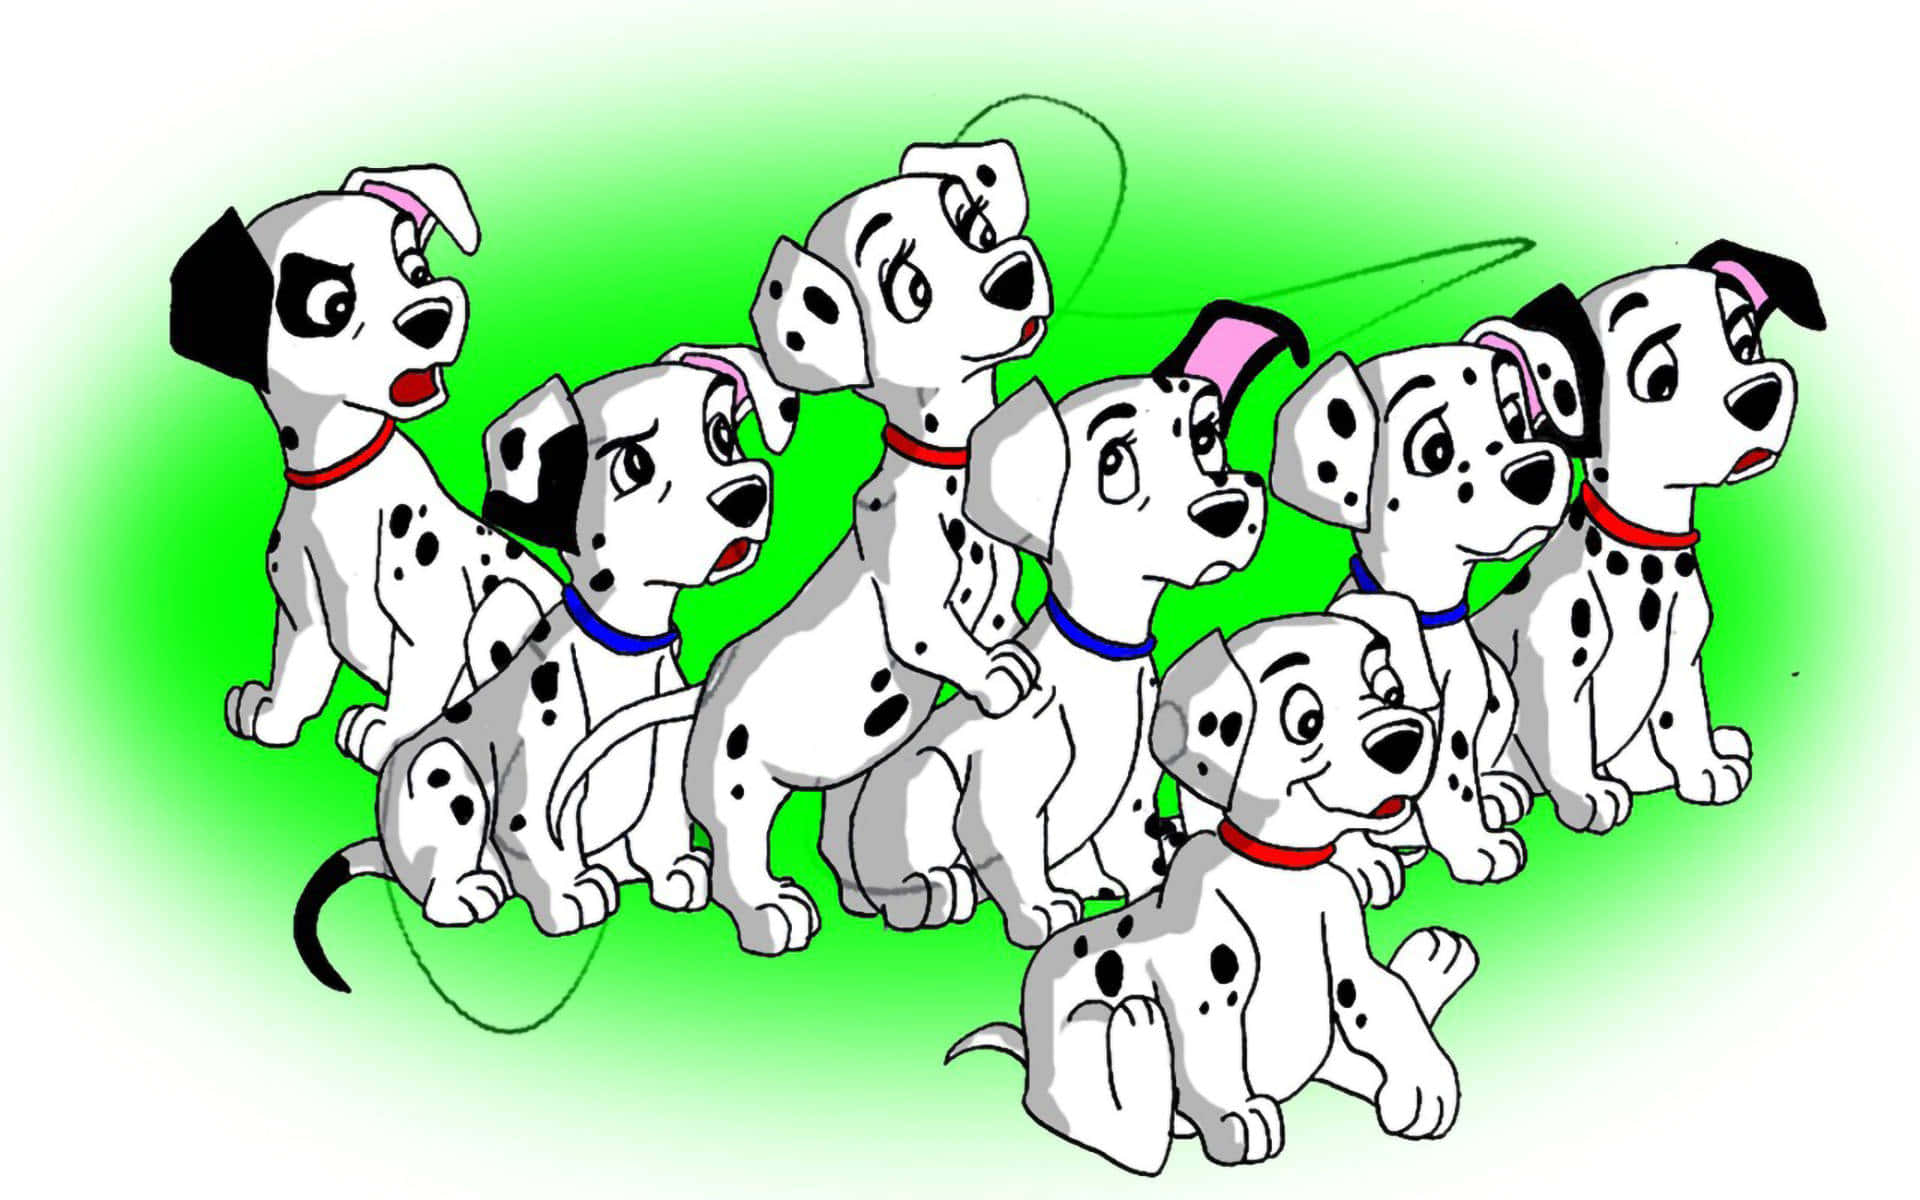 Adorable Puppies from 101 Dalmatians